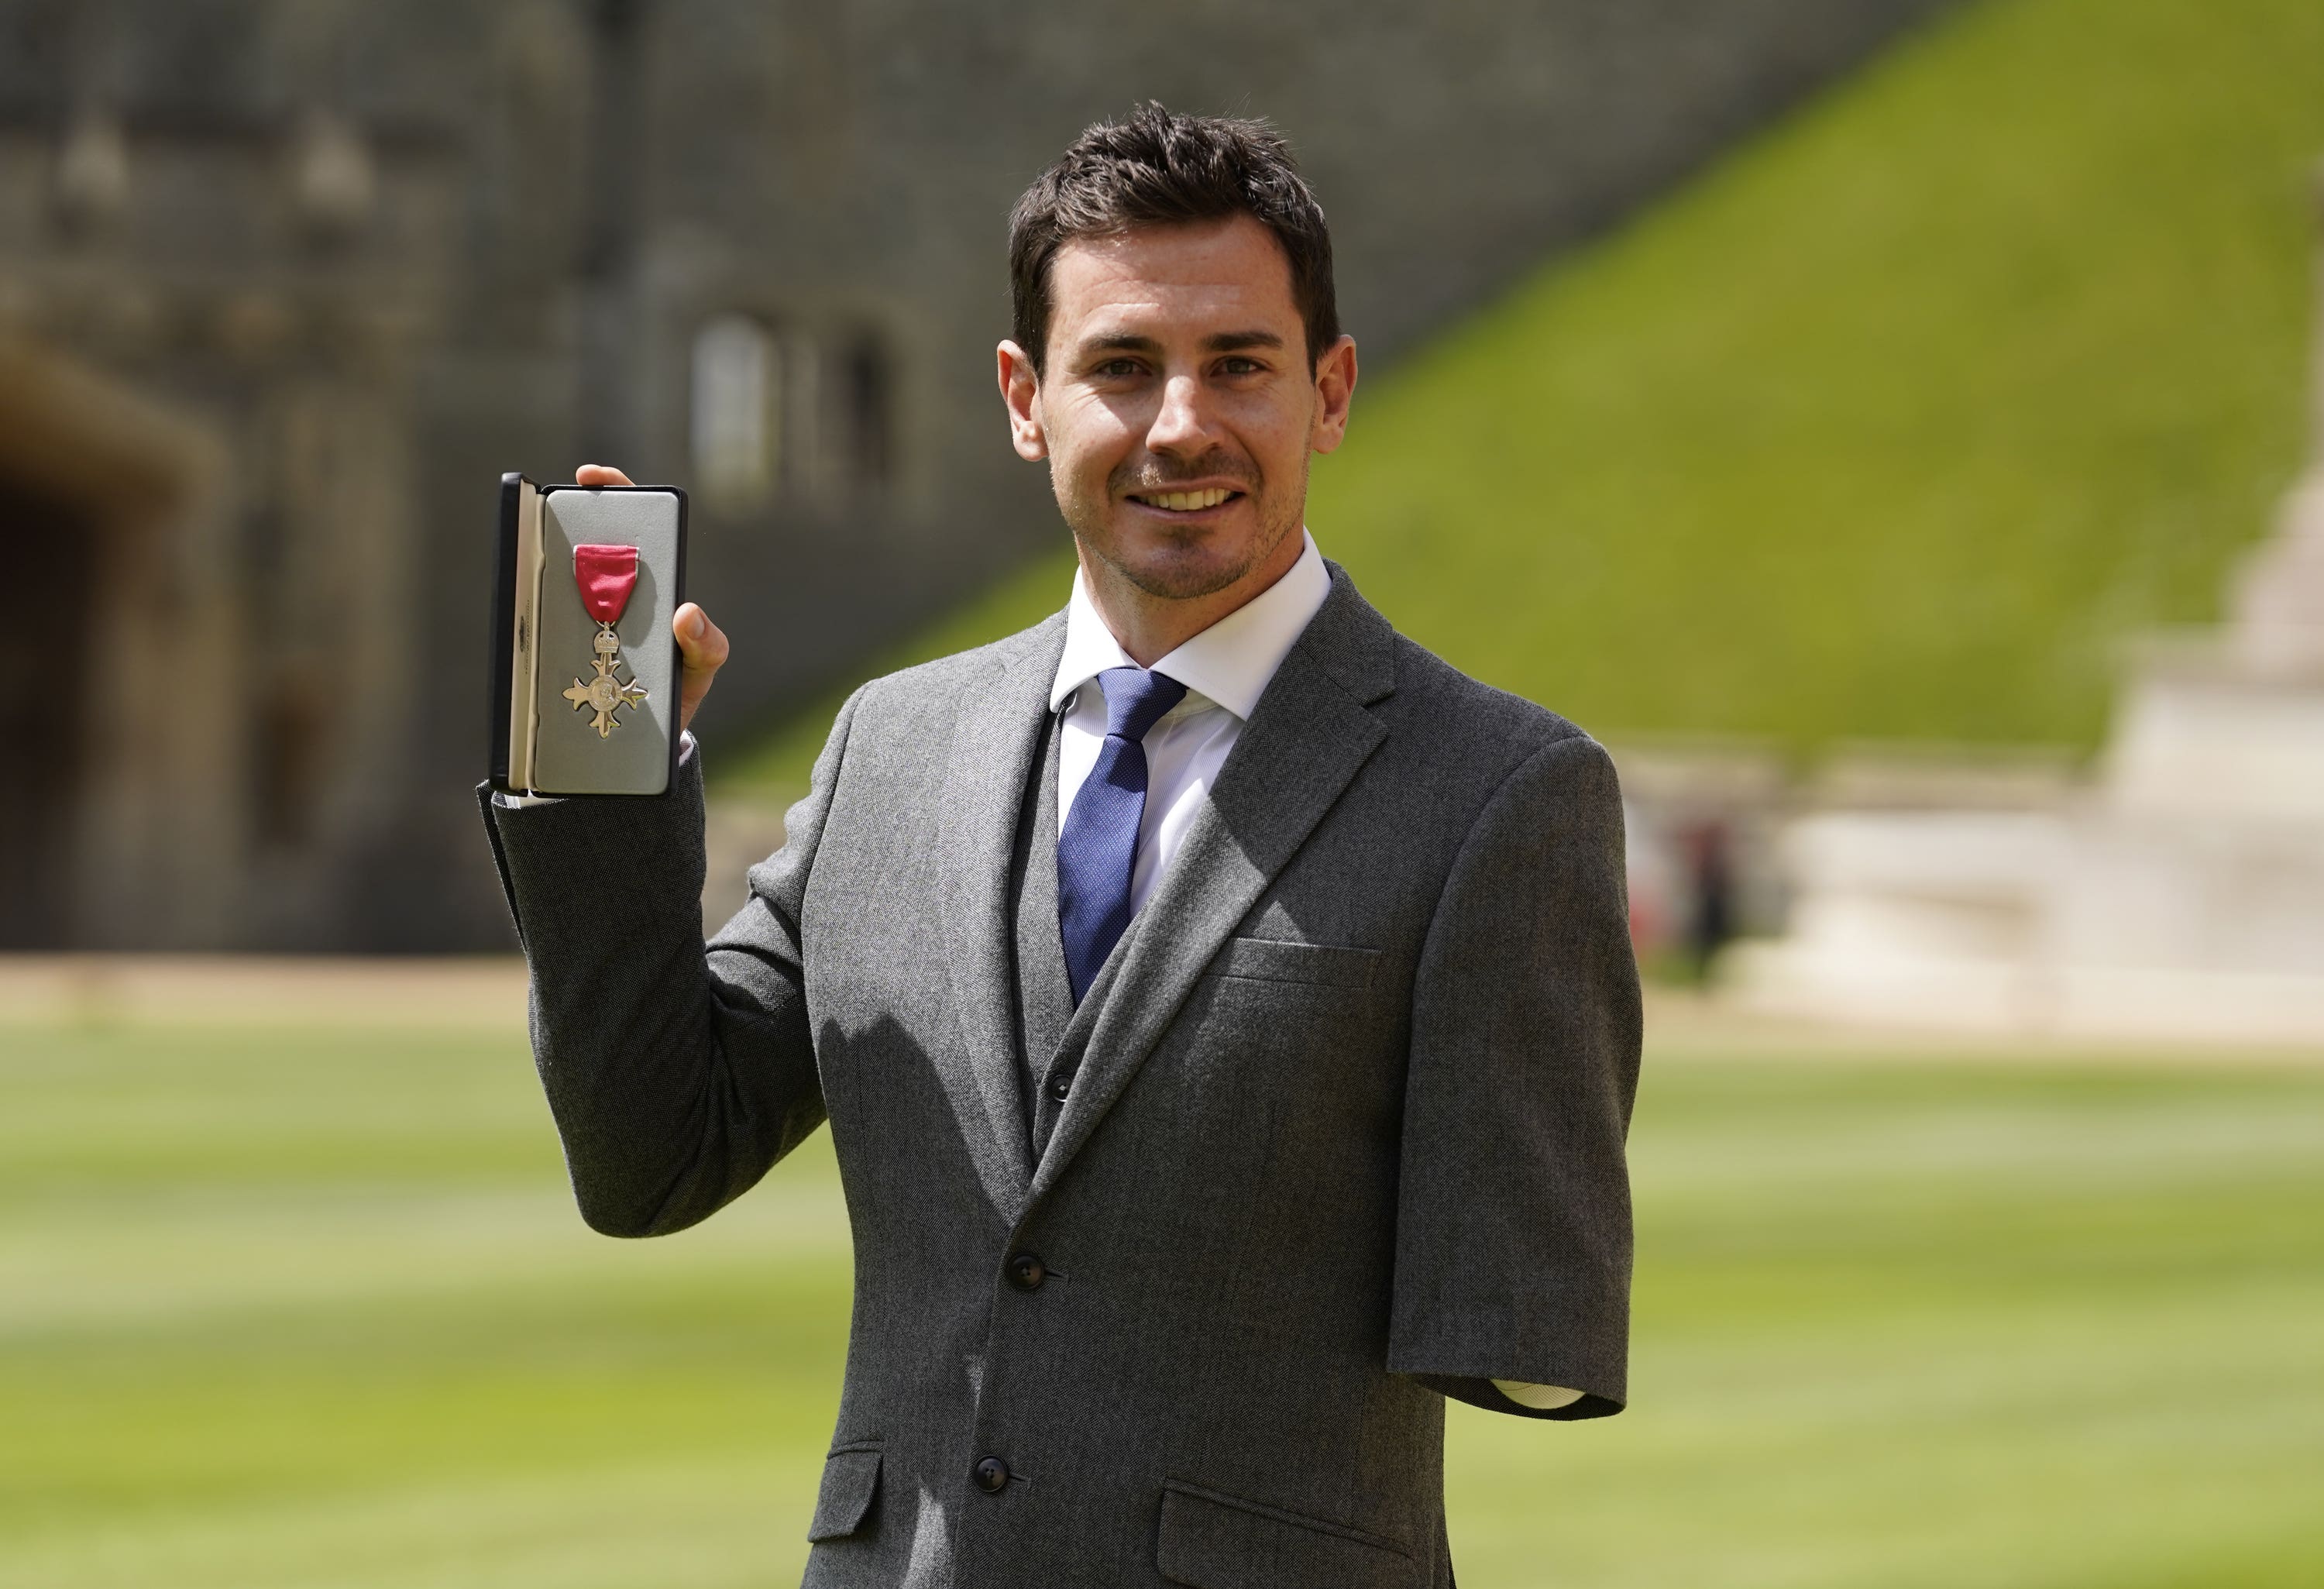 Jaco van Gass with his MBE following an investiture ceremony at Windsor Castle.